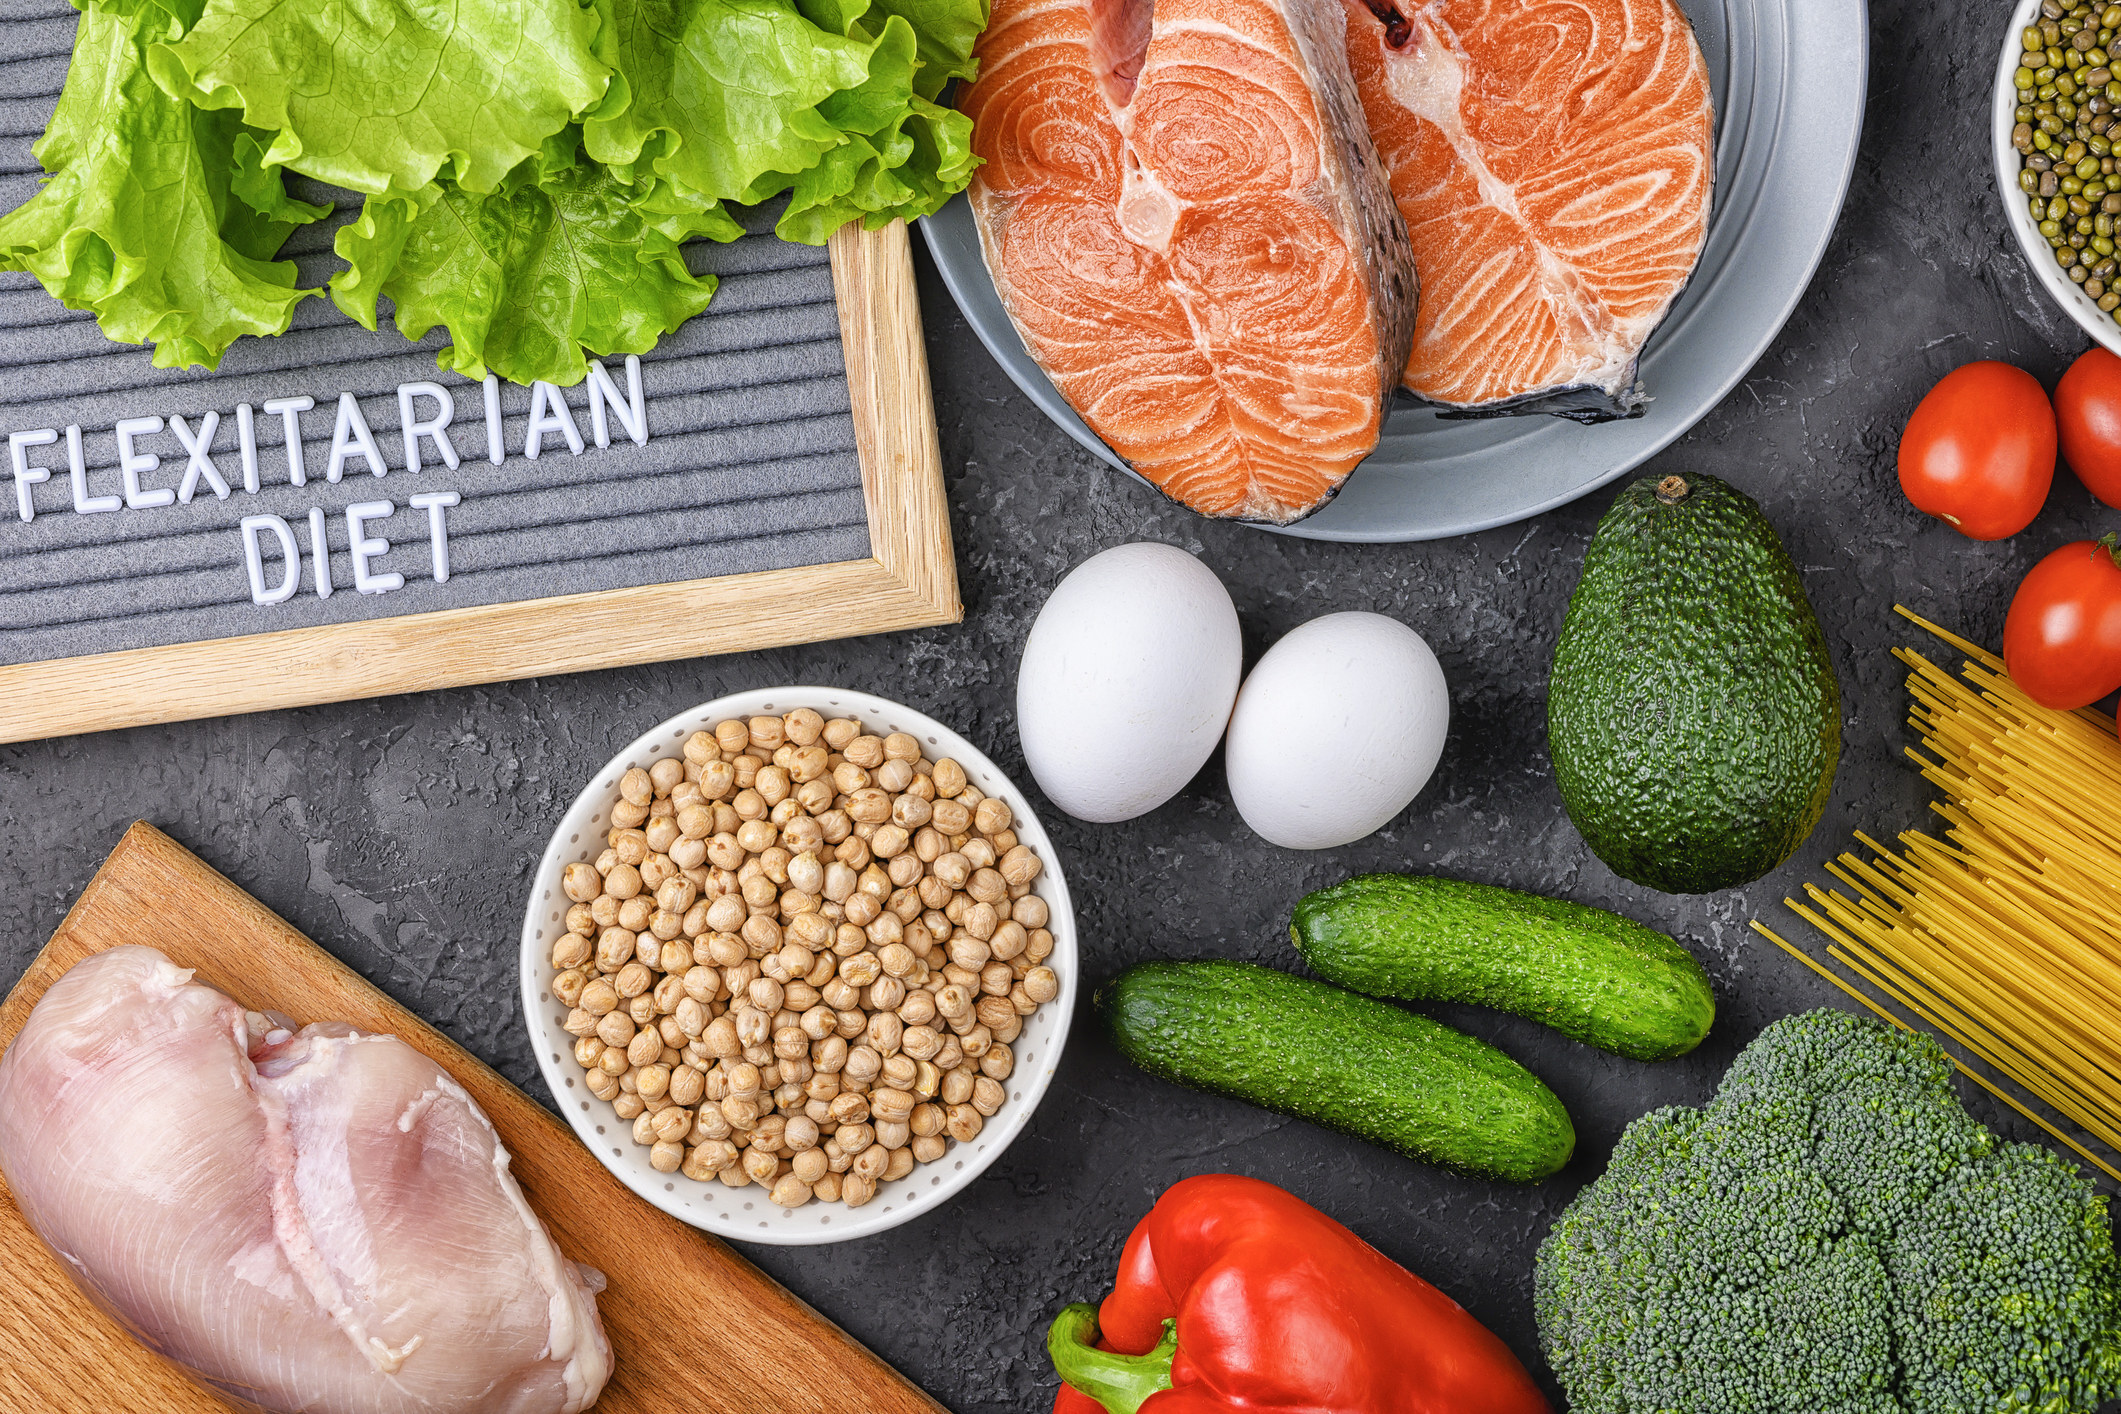 People are adopting flexitarian or pescatarian diets, which allow them to eat more healthily and sustainably, without giving up animal products, and chefs are tailoring their menus accordingly. Photo: Getty Images